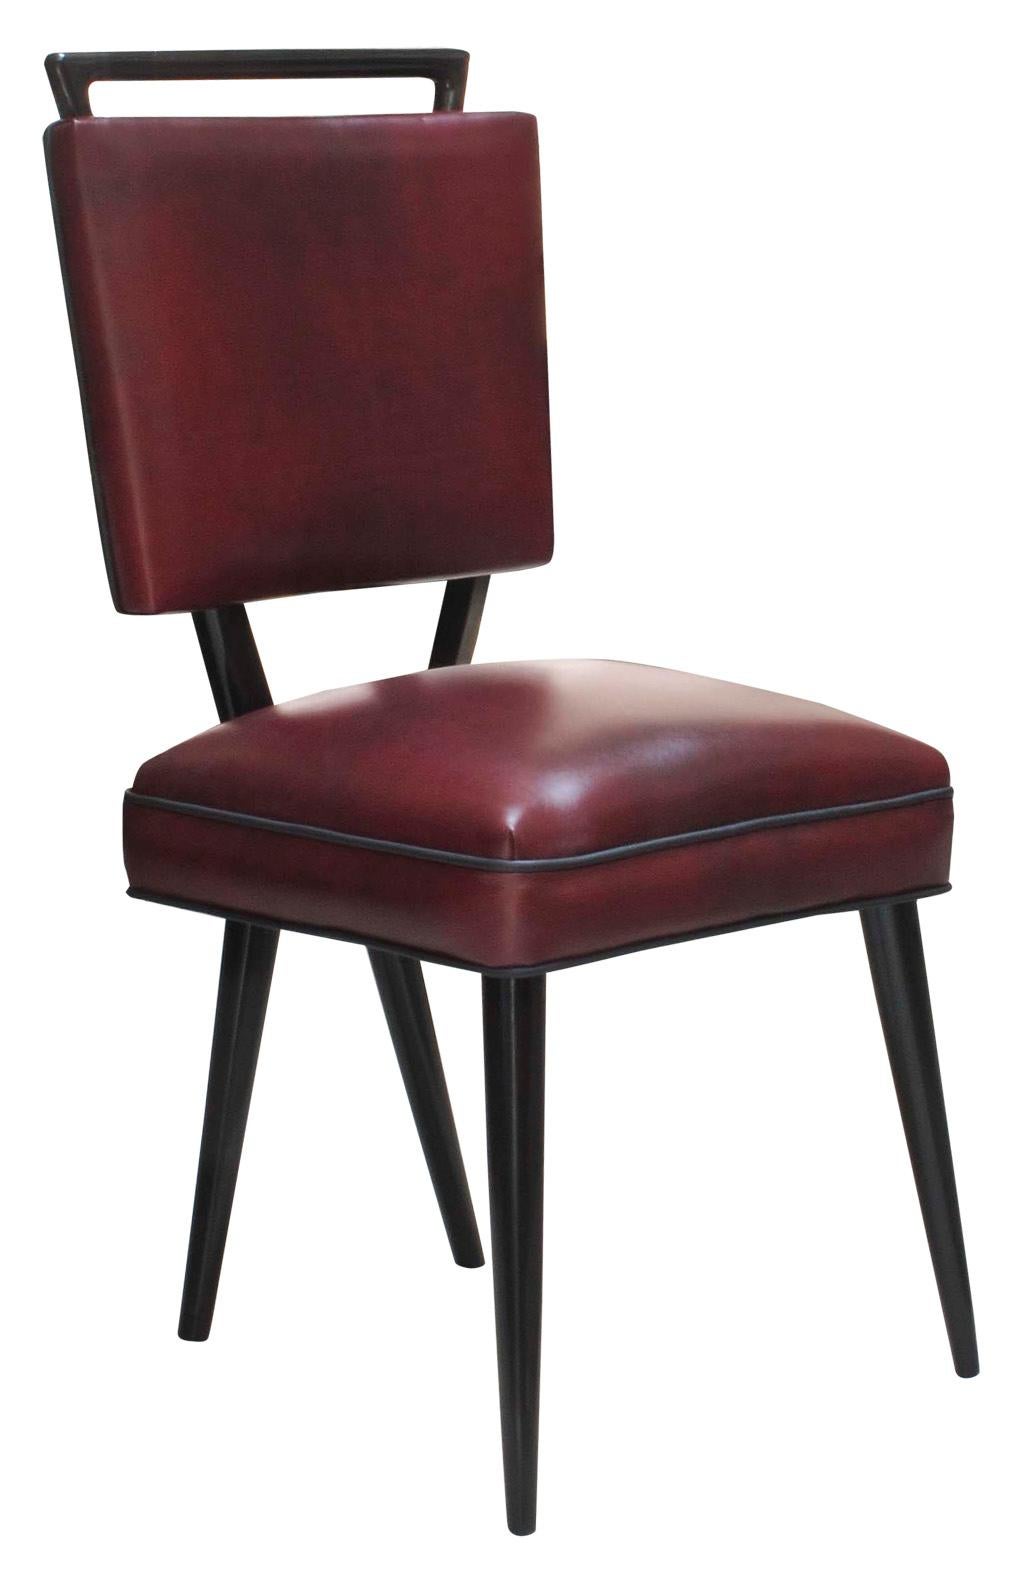 Mid-20th Century Set of 12 Chairs 50° in Leather and Wood, Italian For Sale